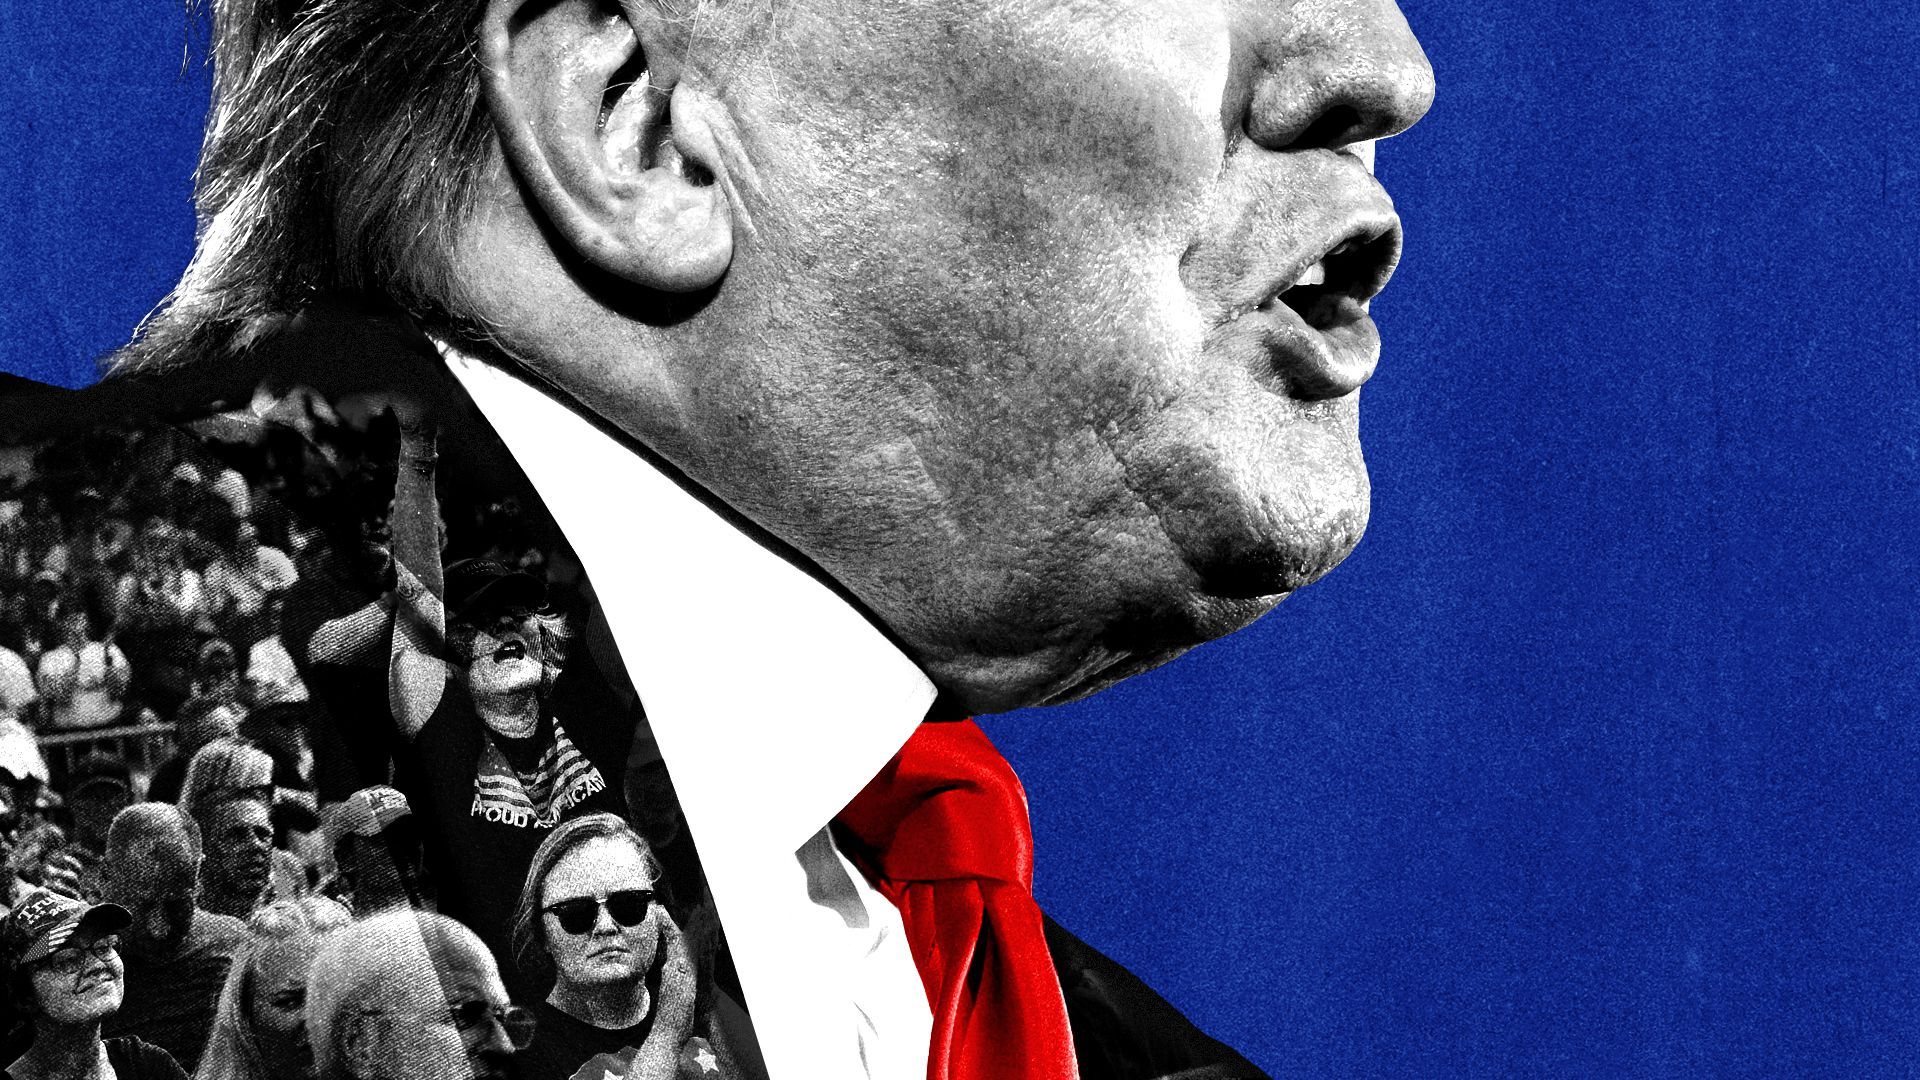 Photo illustration of President Trump with a photo from a campaign rally overlayed on his suit jacket